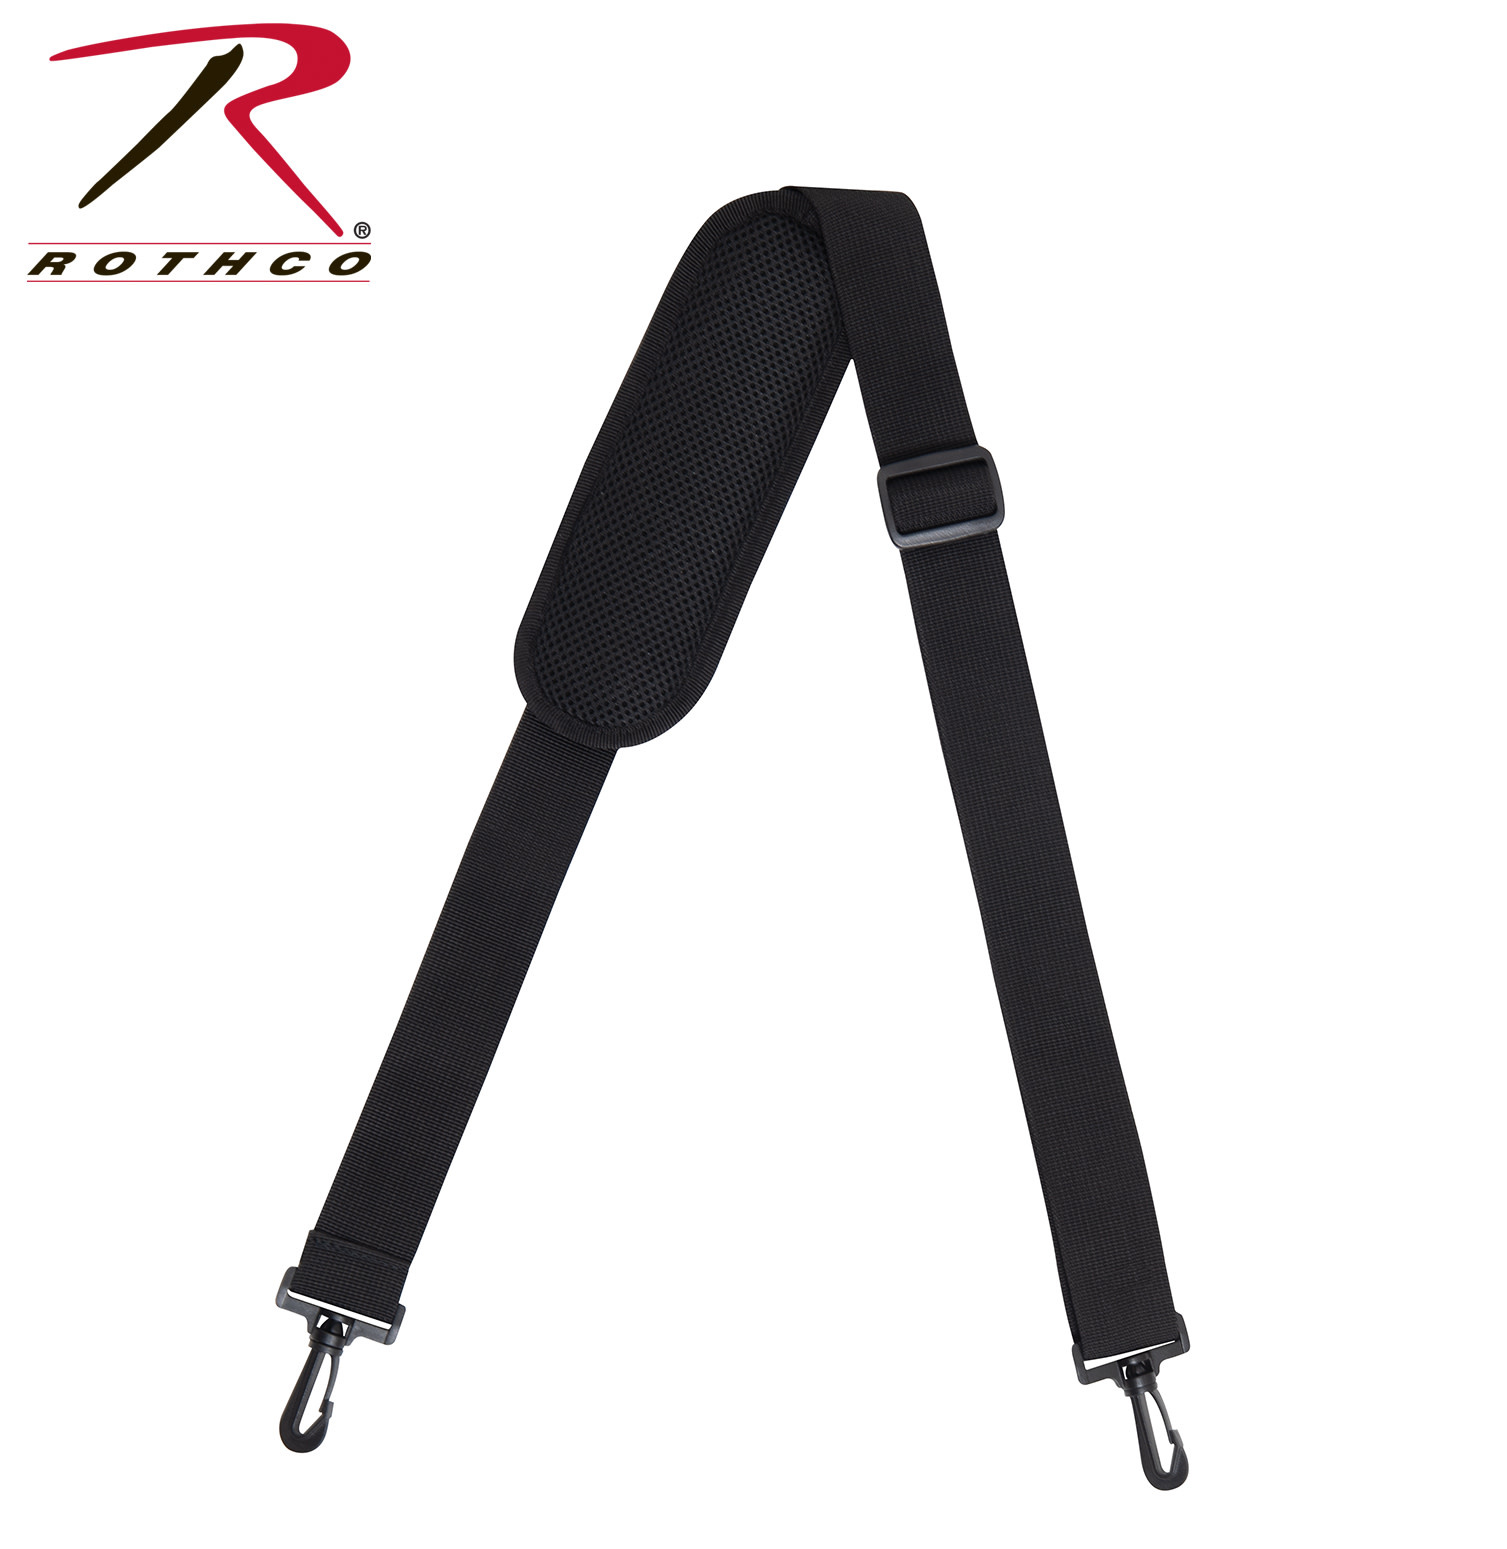 Rothco All Purpose Shoulder Strap w/Removable Pad